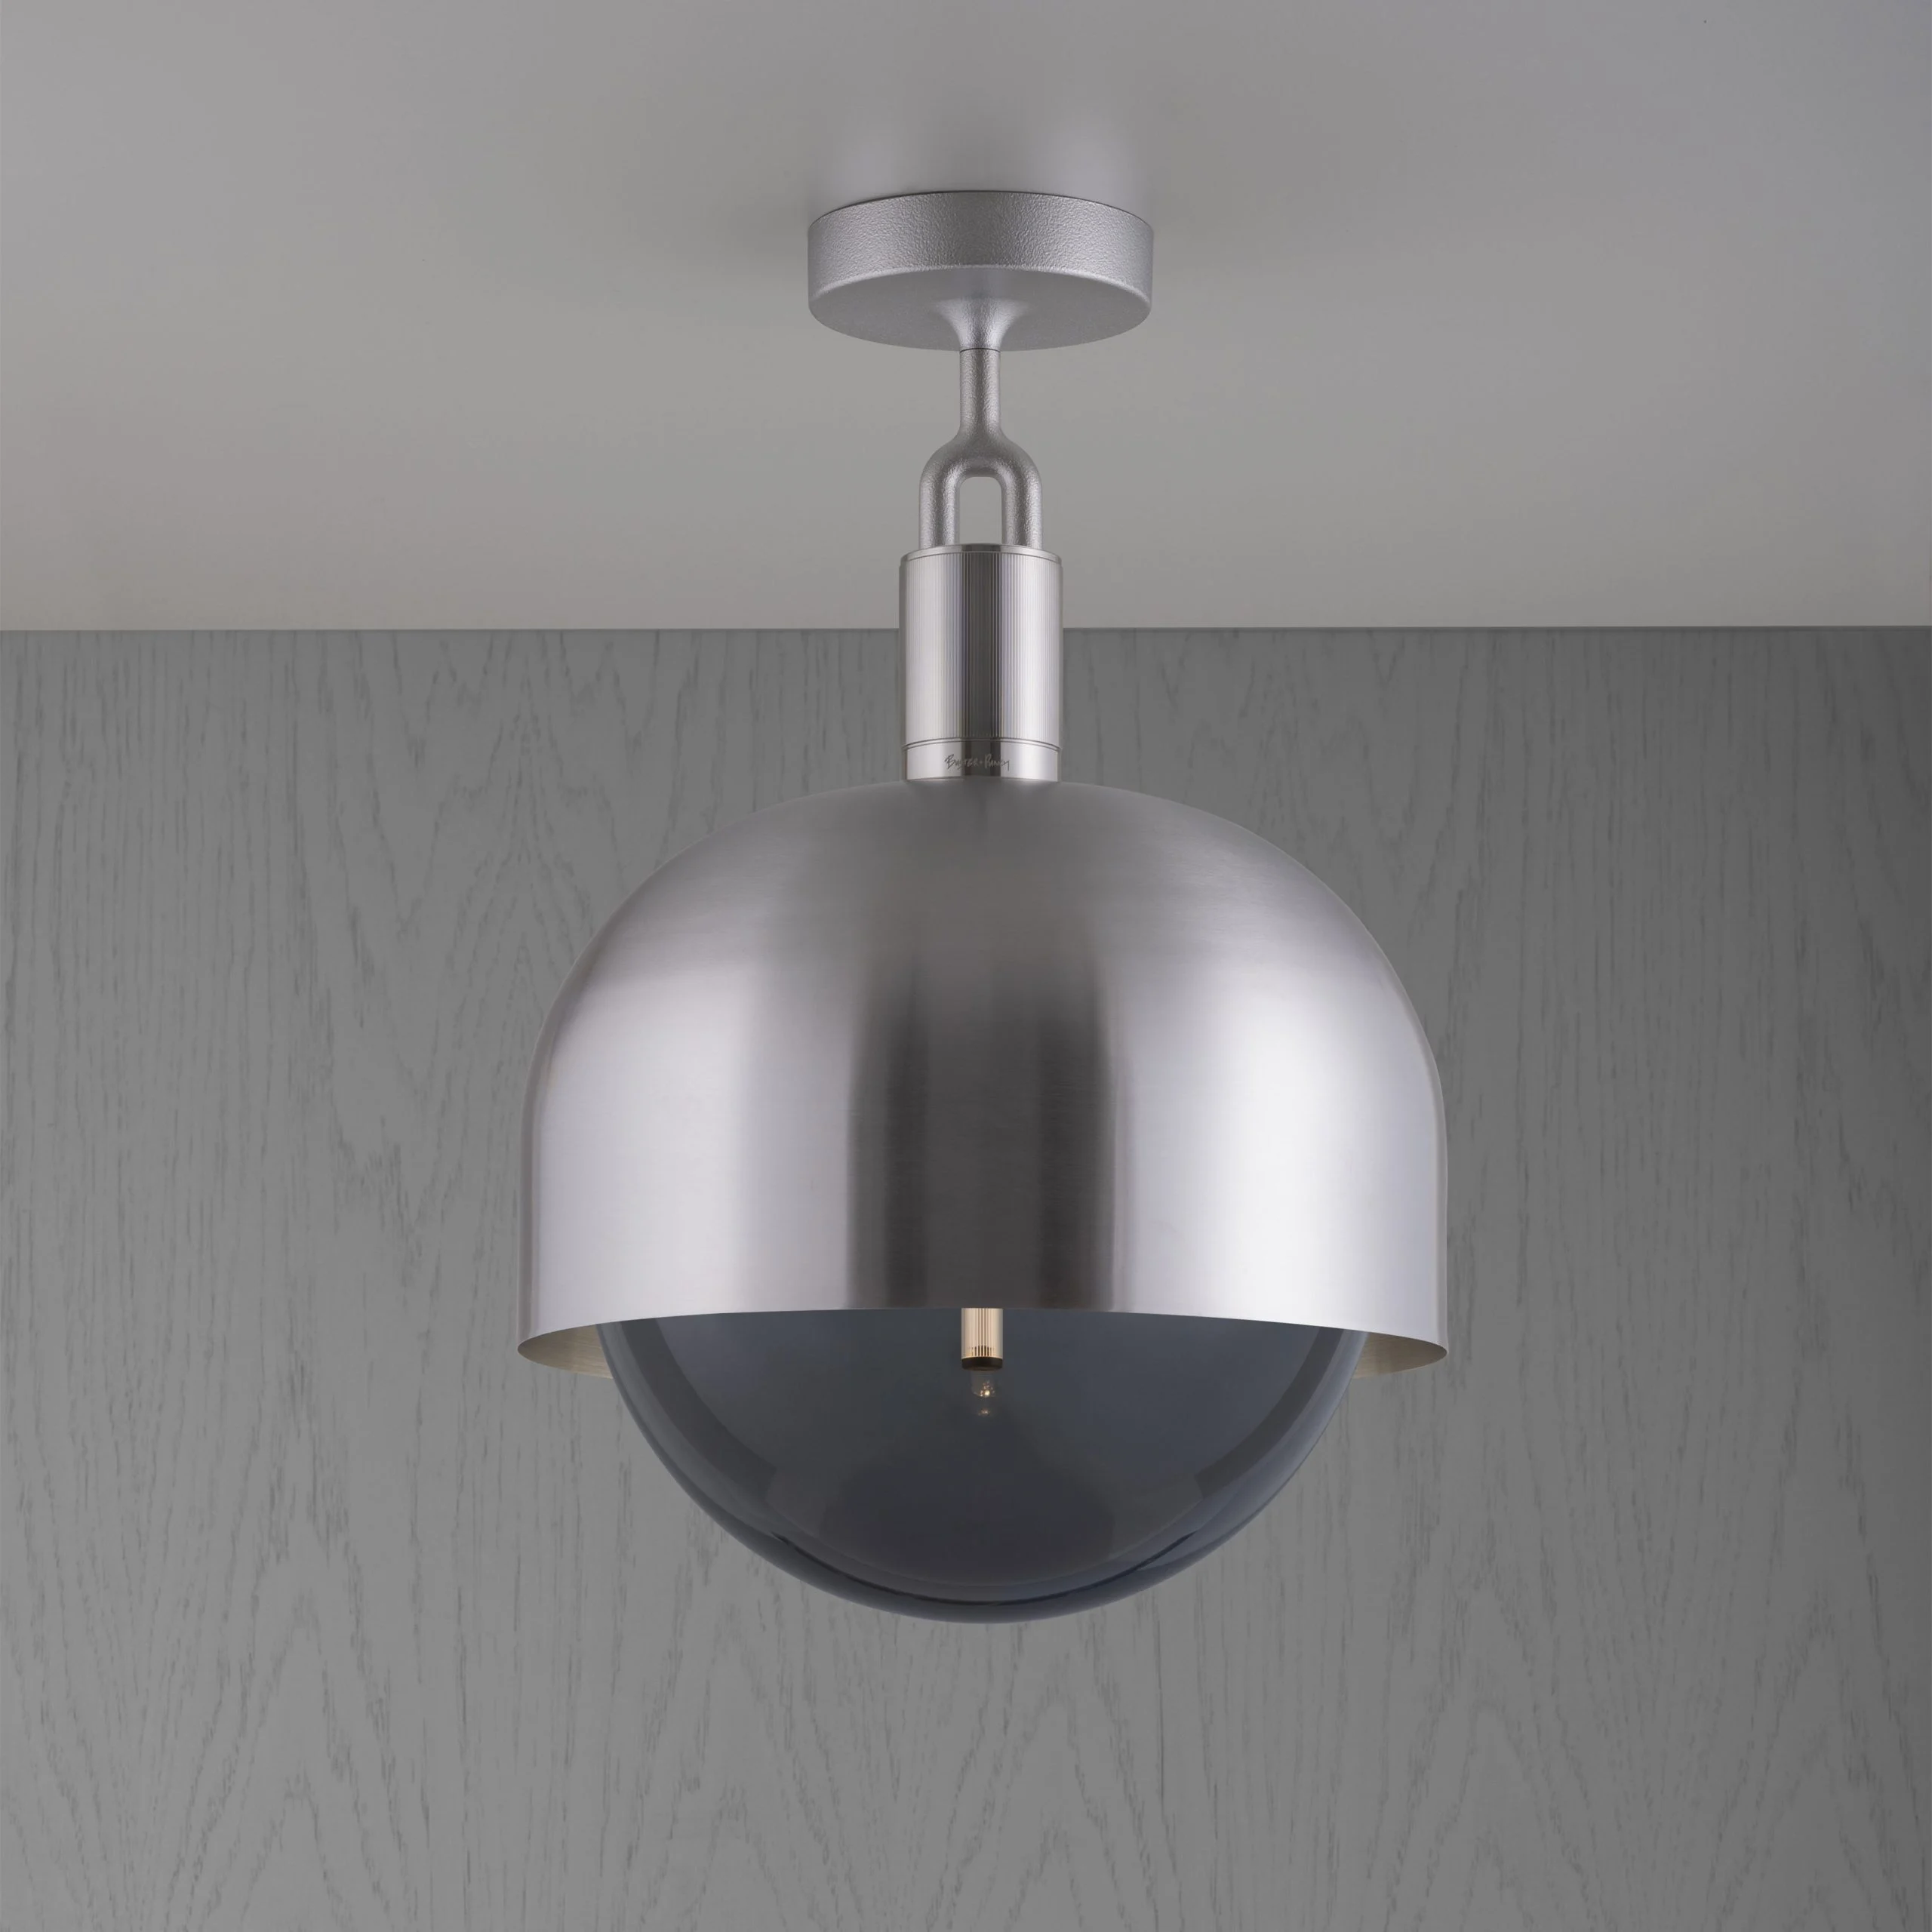 Forked_lighting_Ceiling_Steel_Large_Shade_Smoked_Globe_v1_Web-scaled